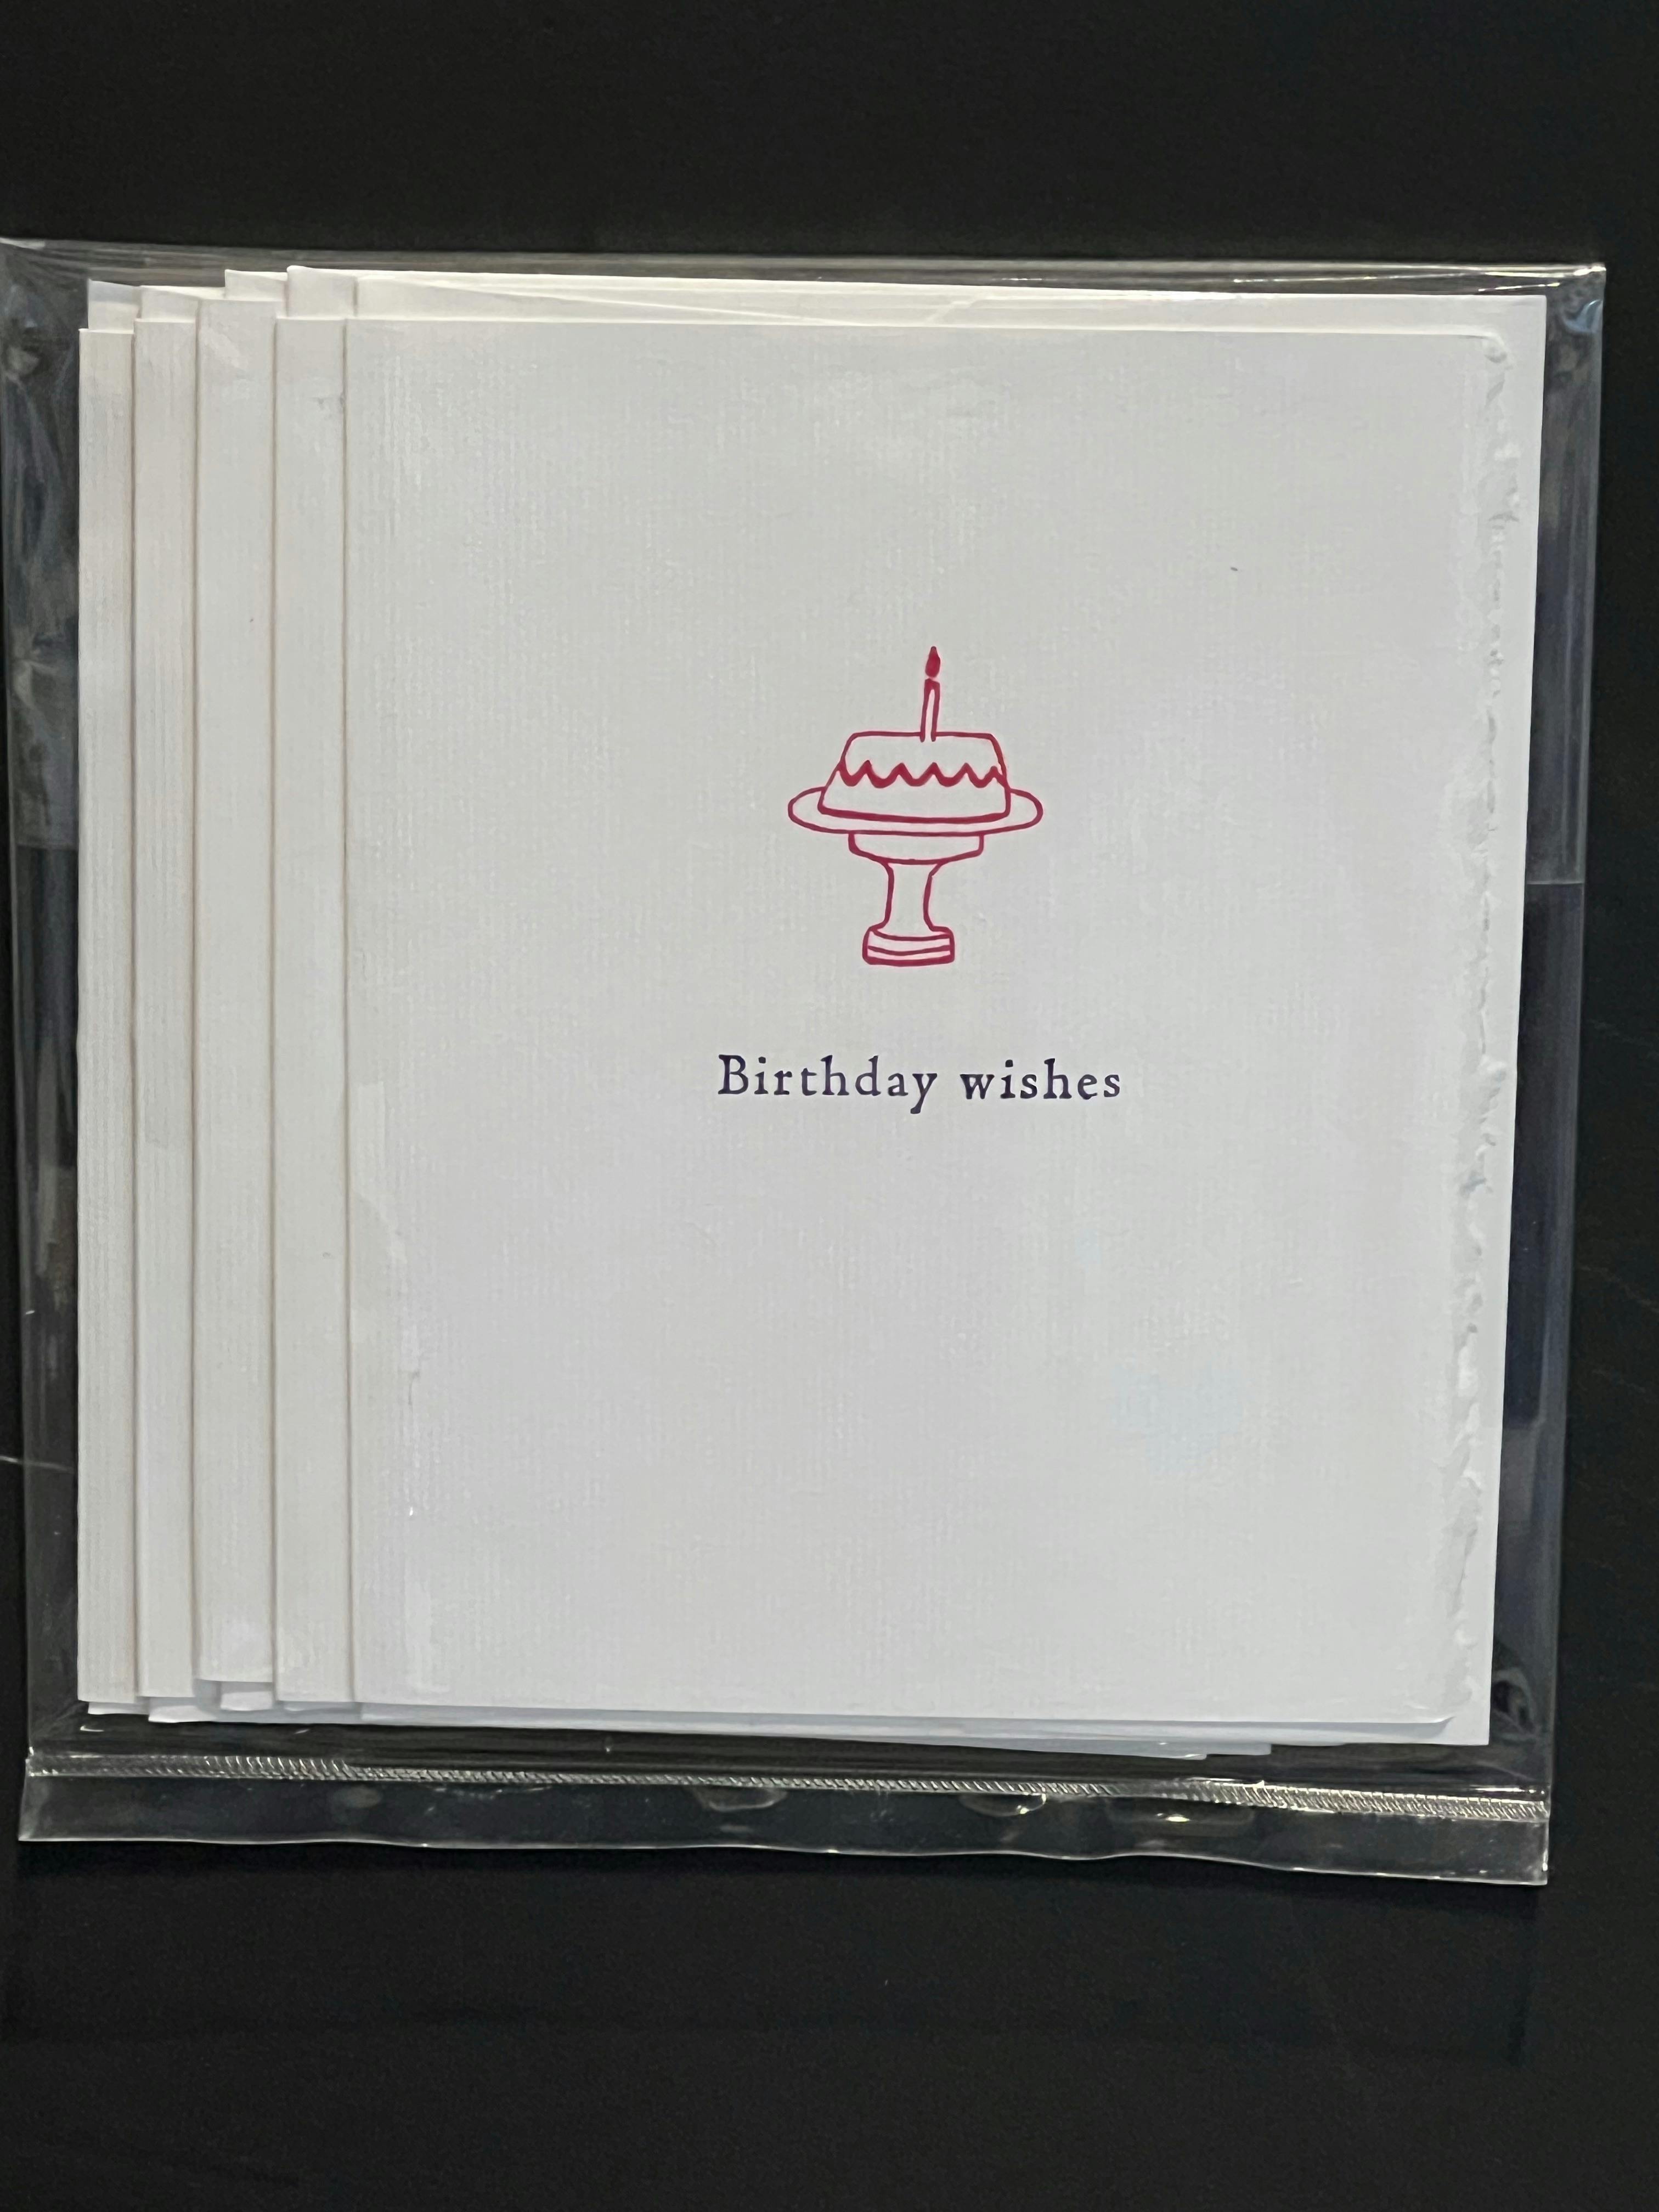 Hand crafted cards